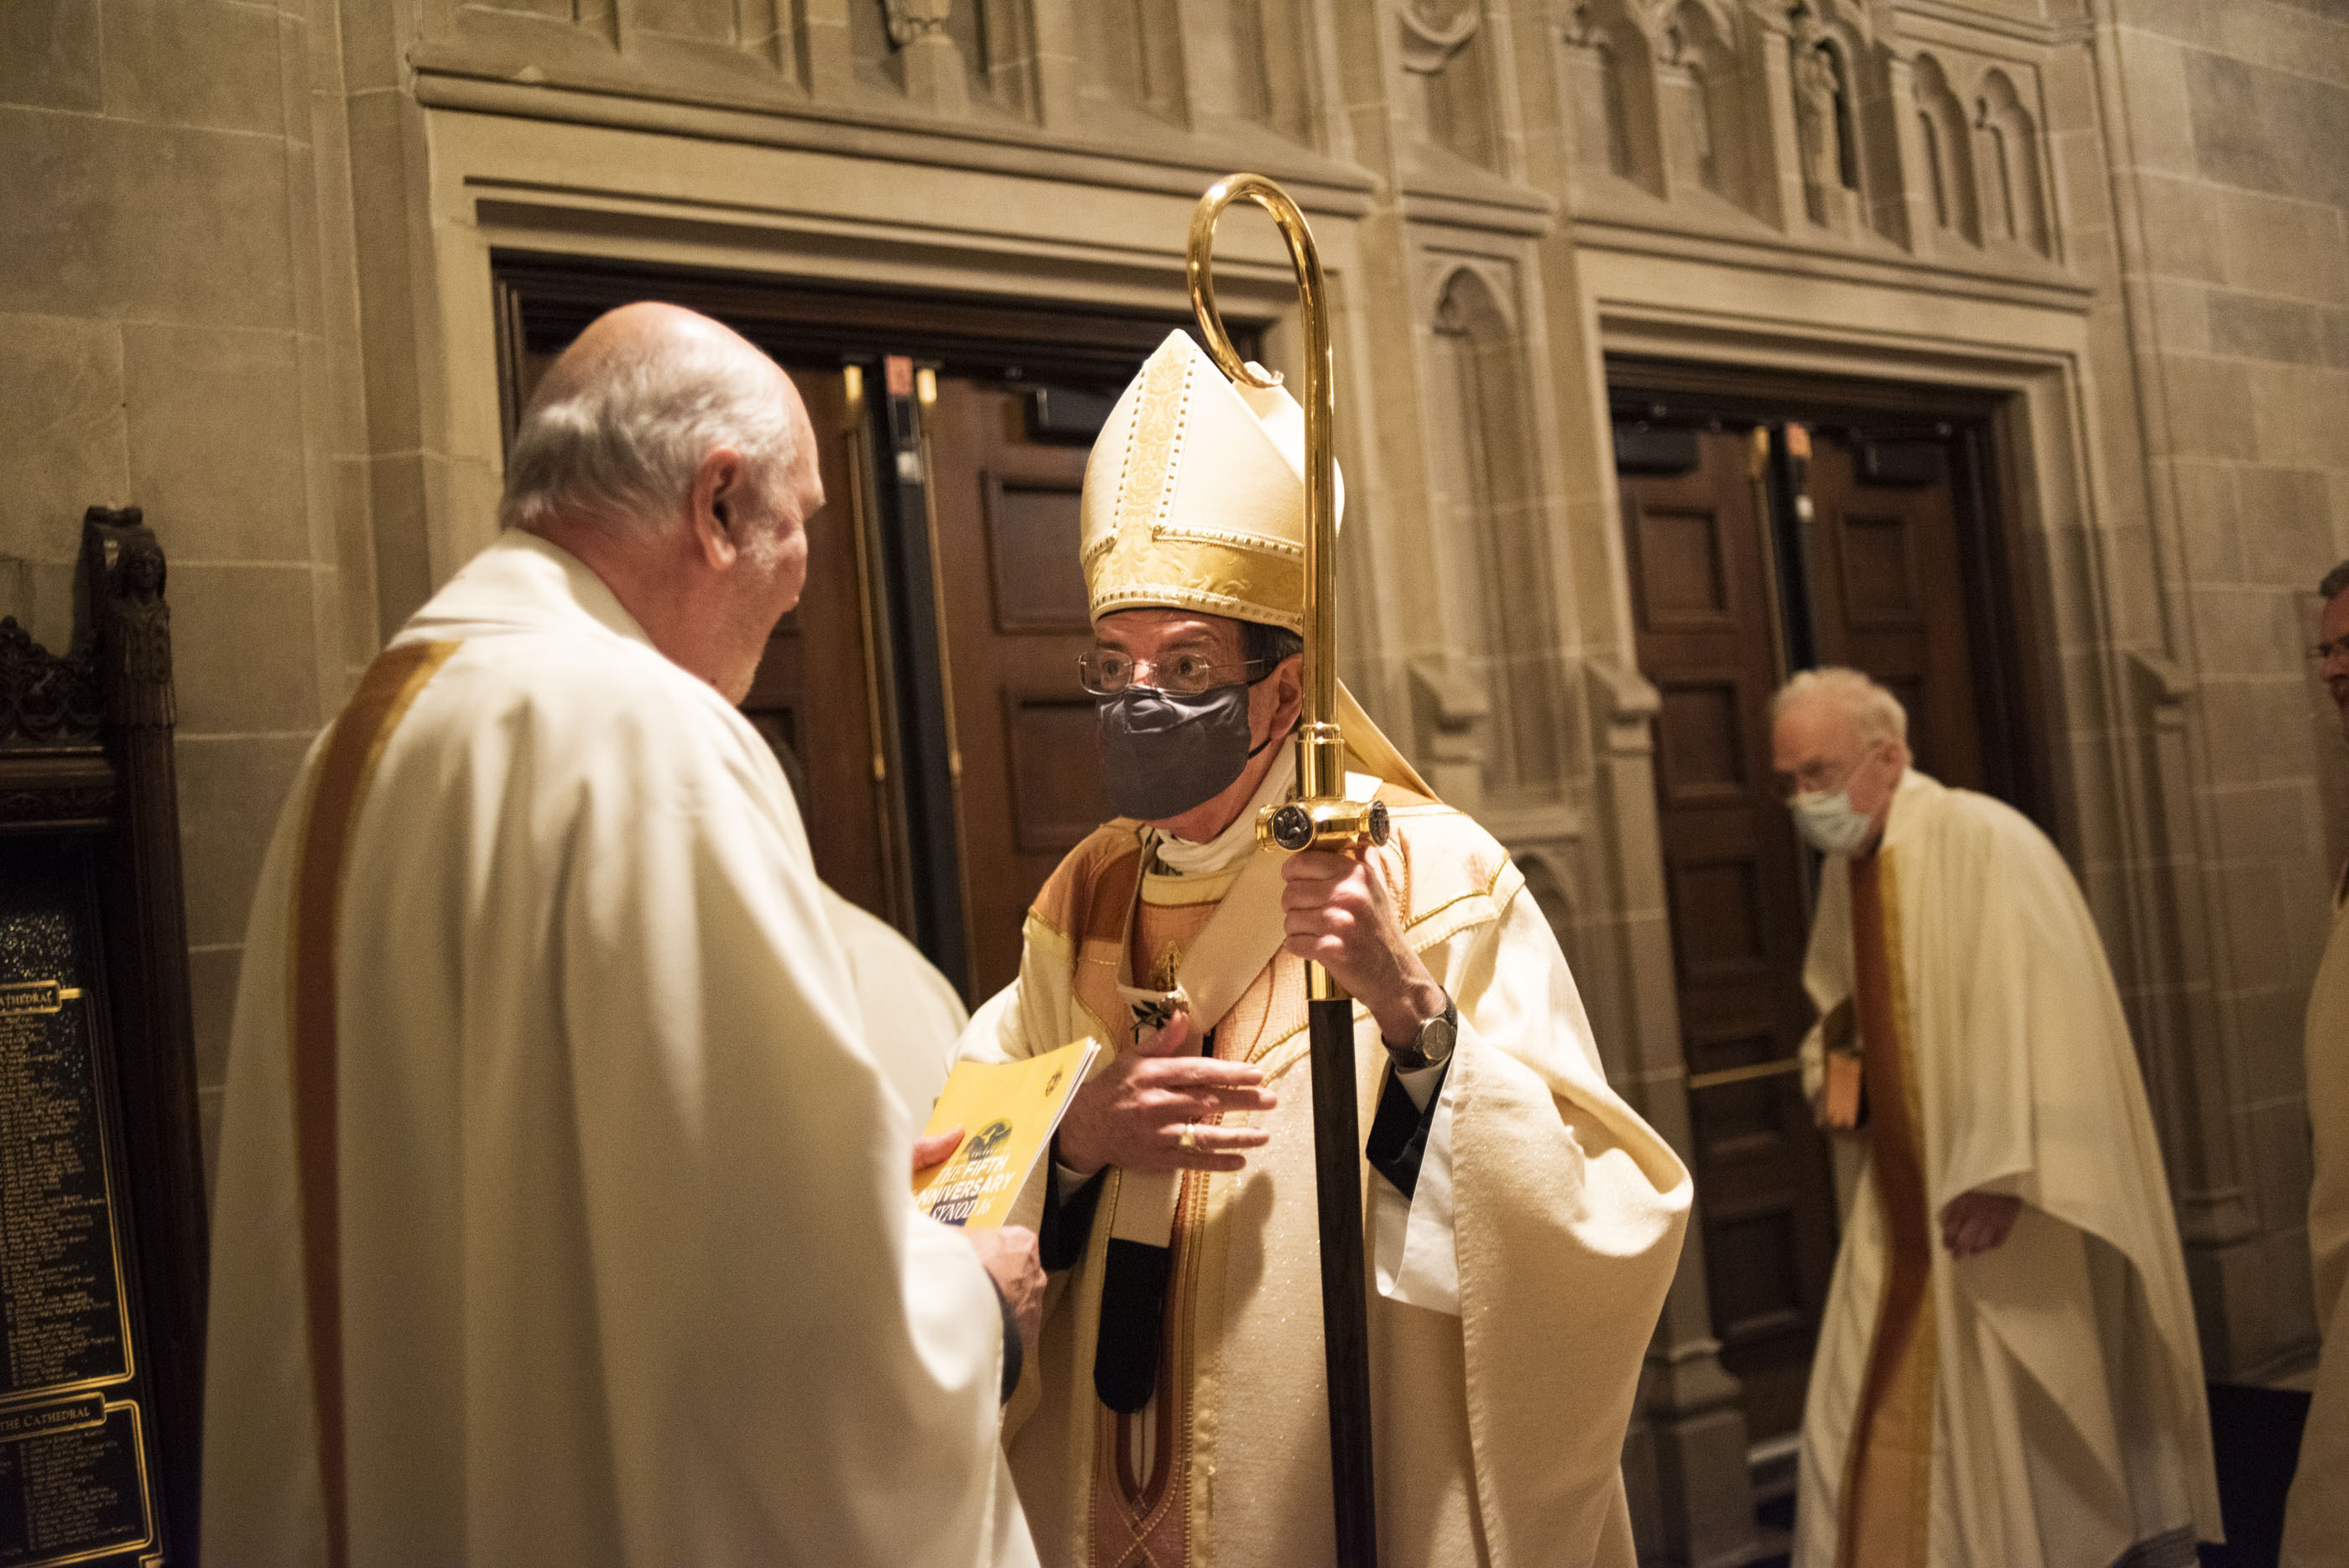 Archbishop Vigneron gathers with priests following Synod 16 five-year anniversary Mass